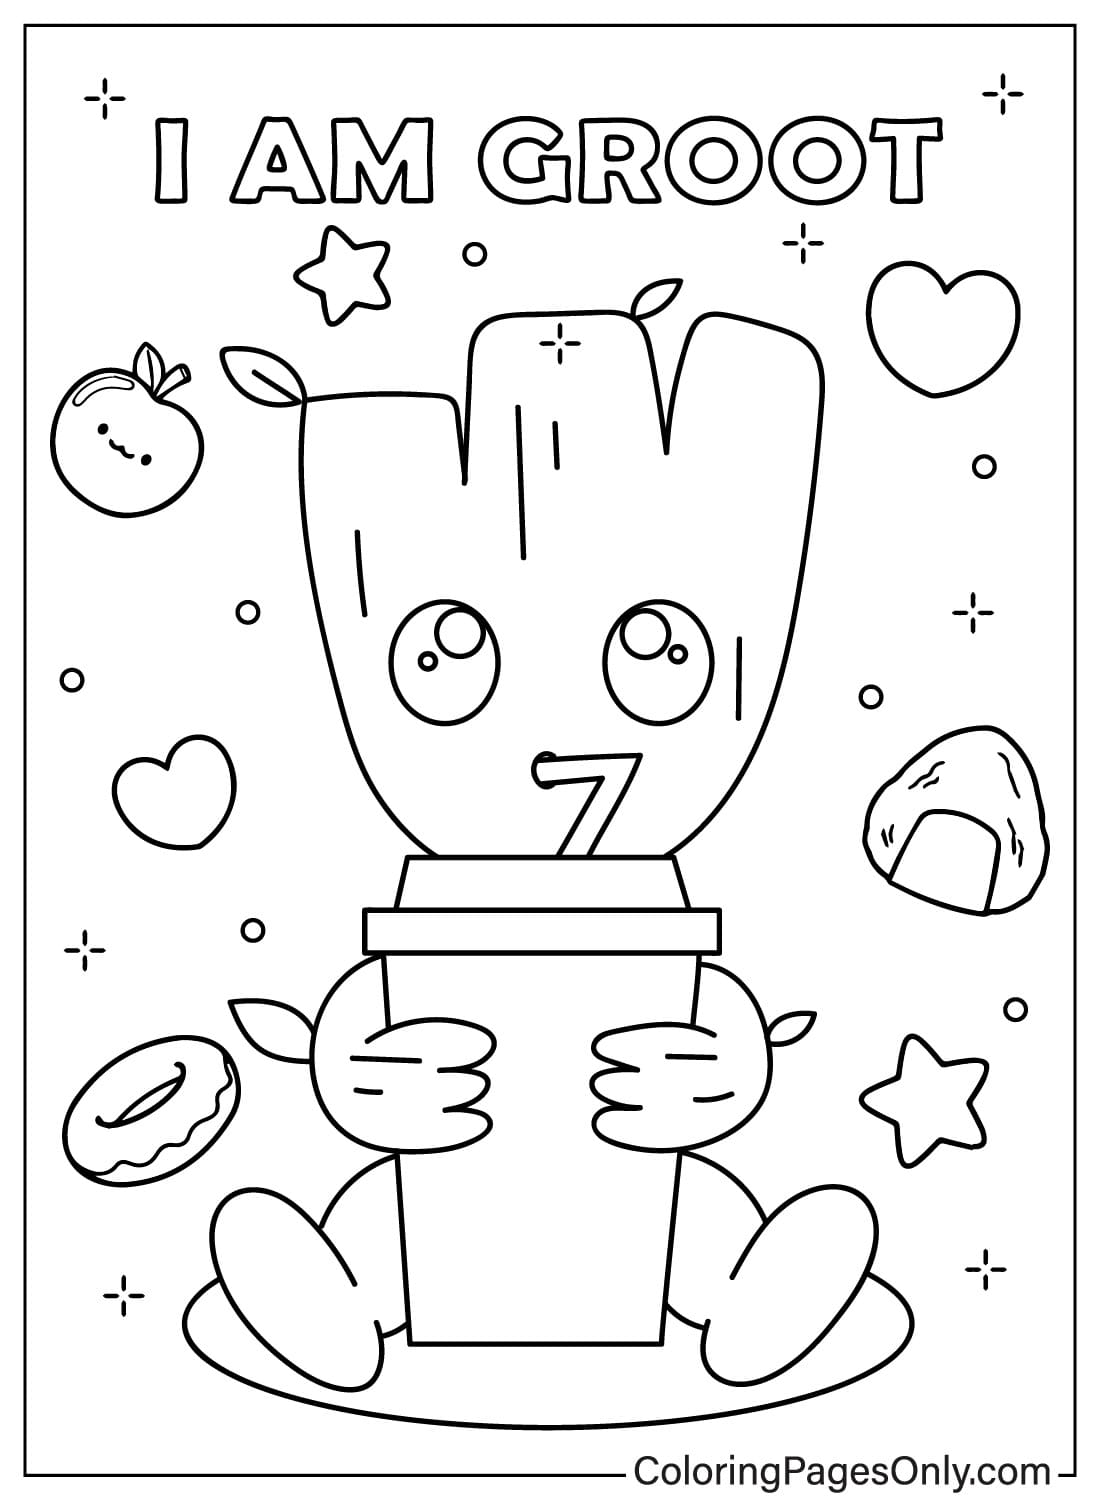 Kawaii Groot Coloring Page from Groot